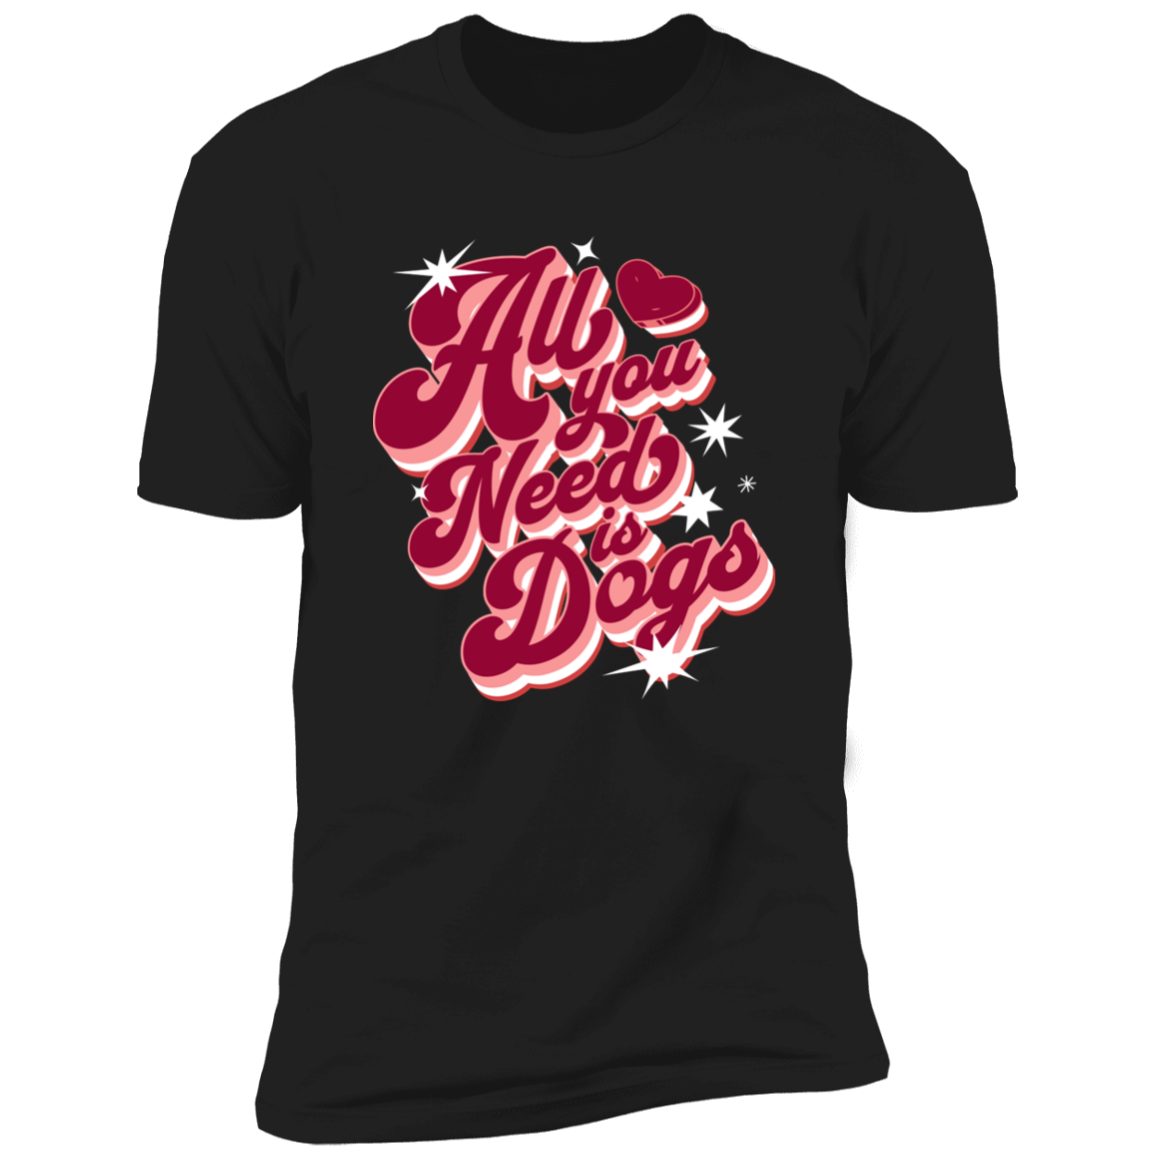 All I Need is Dogs T-shirt, Dog Shirt for humans, in black